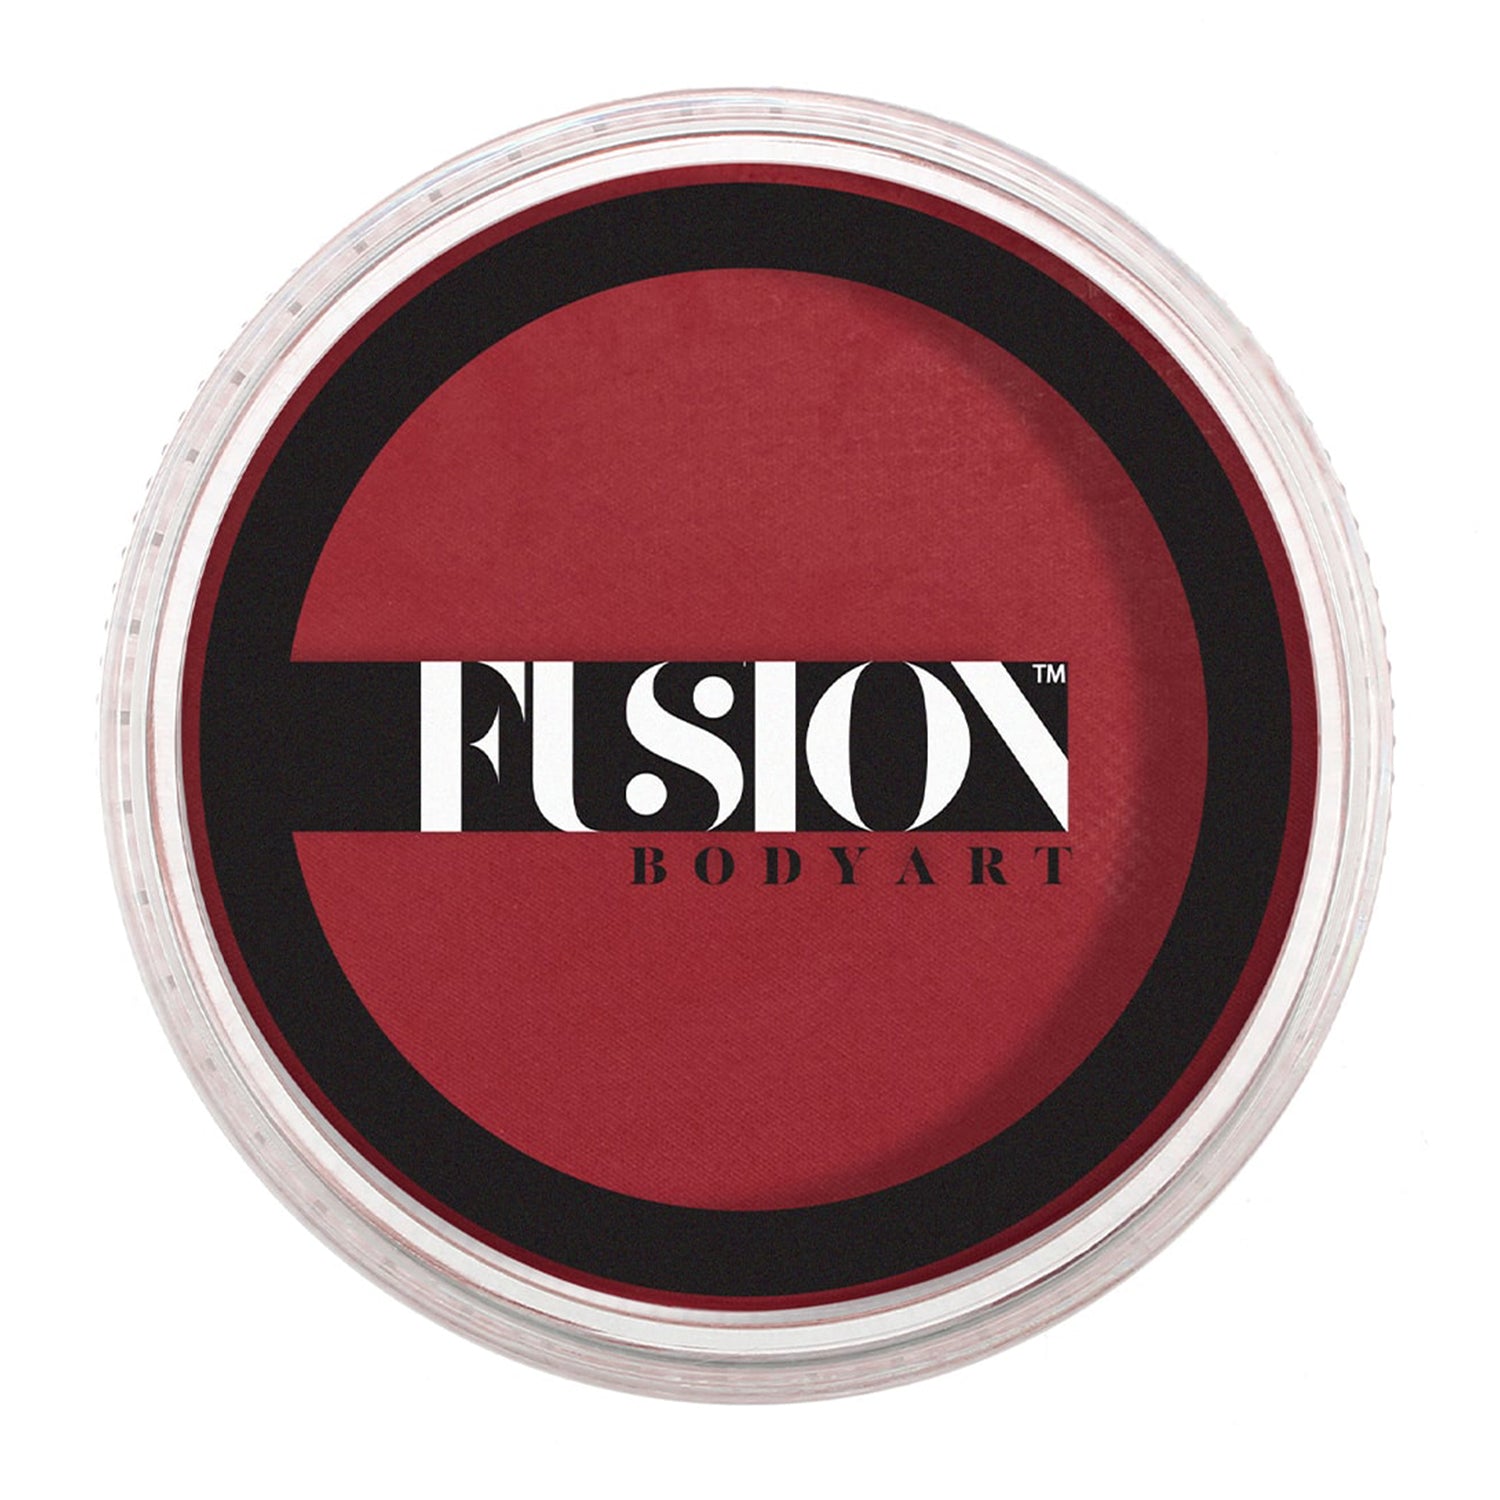 Fusion Body Art Face & Body Paint - Prime Sweet Cherry Red